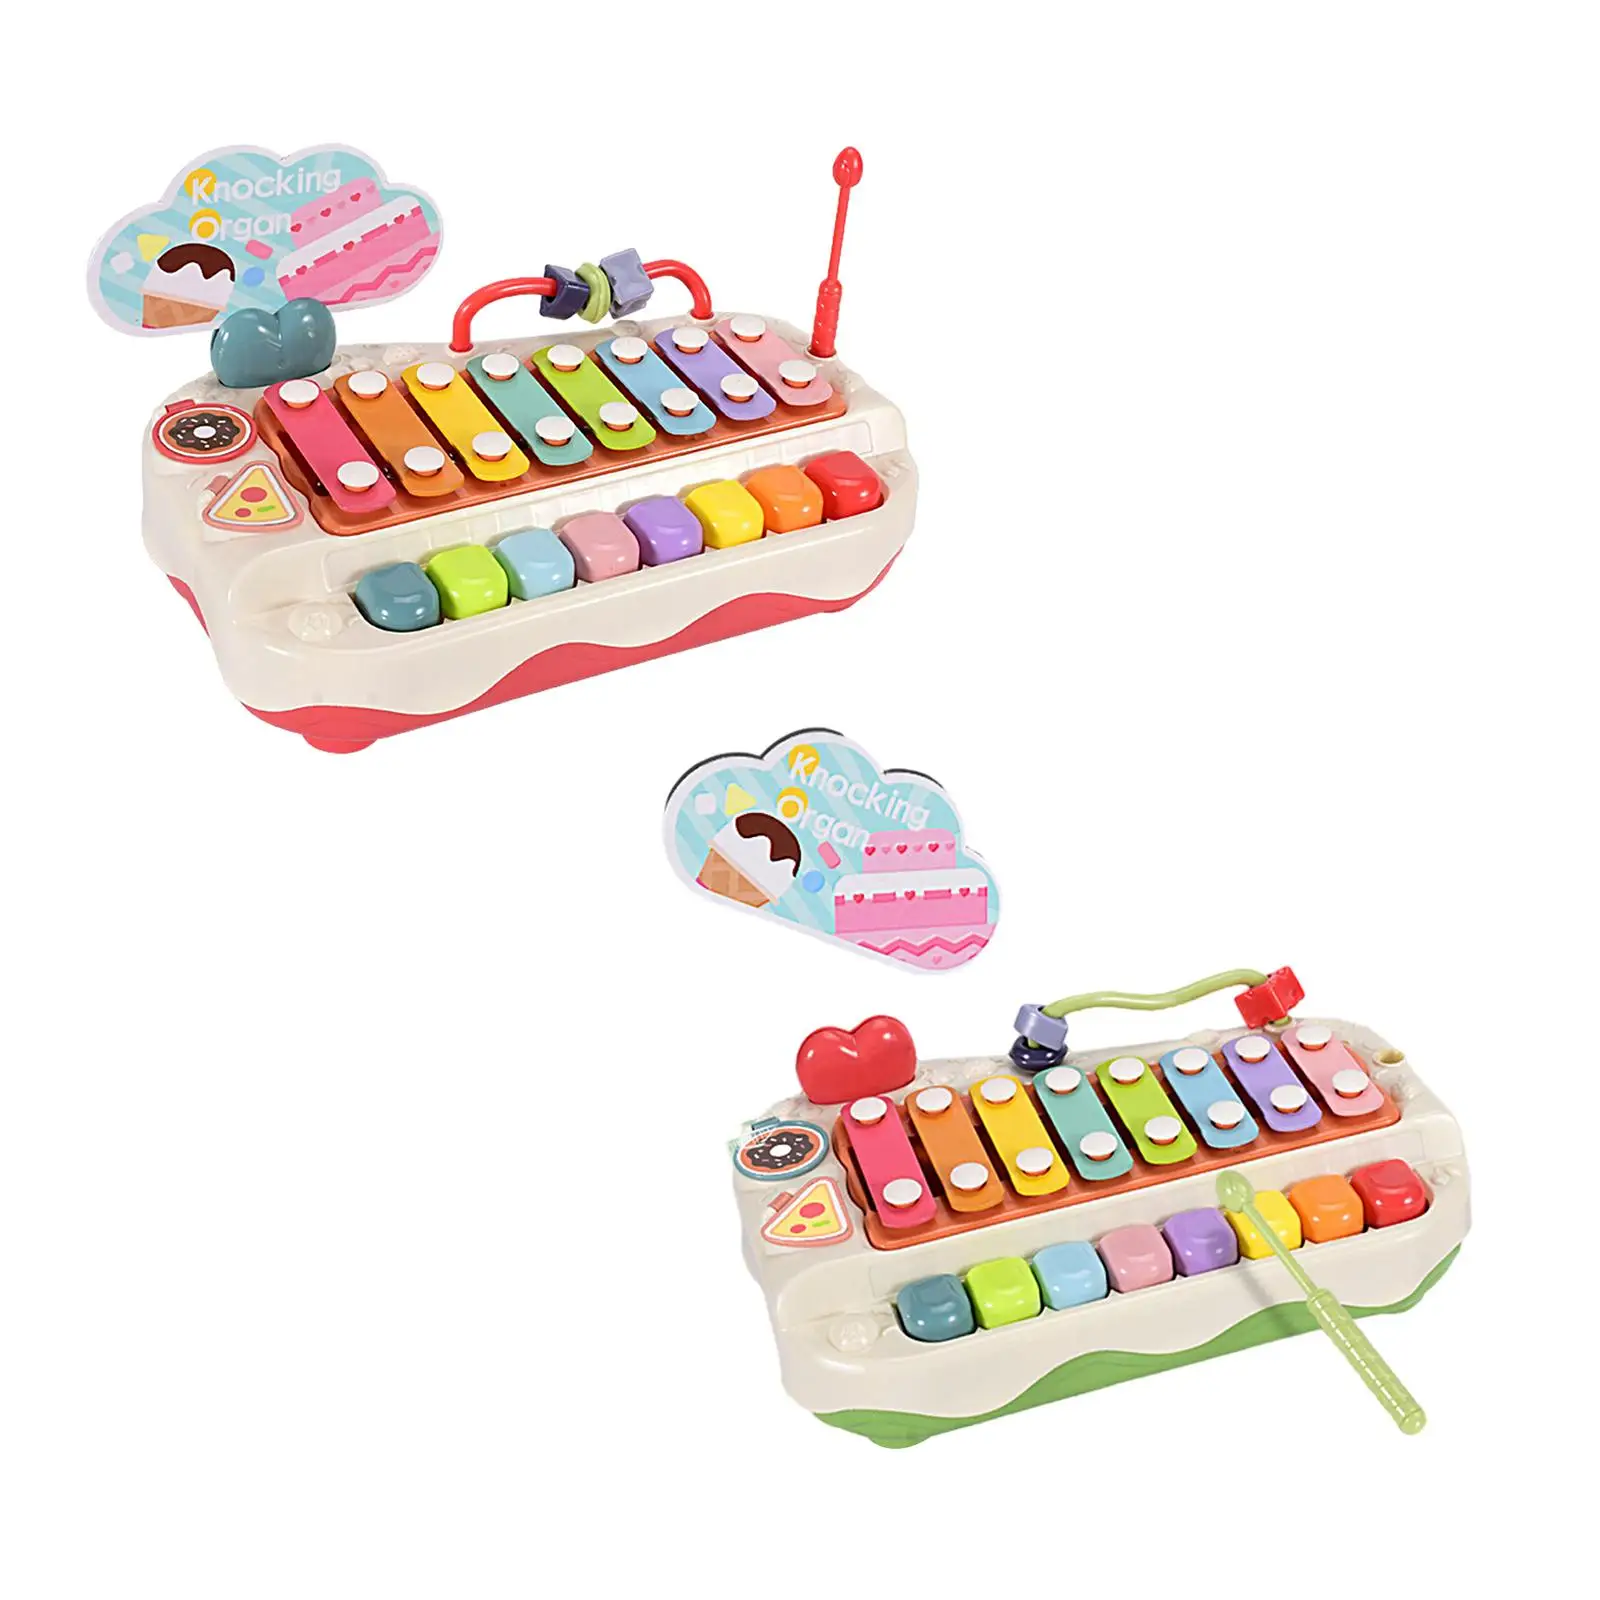 Kids Musical Toy Learning Toy Preschool Eight Tone Colorful Baby Piano Xylophone Toy for Boy Girls Kids 3+ Toddler Birthday Gift